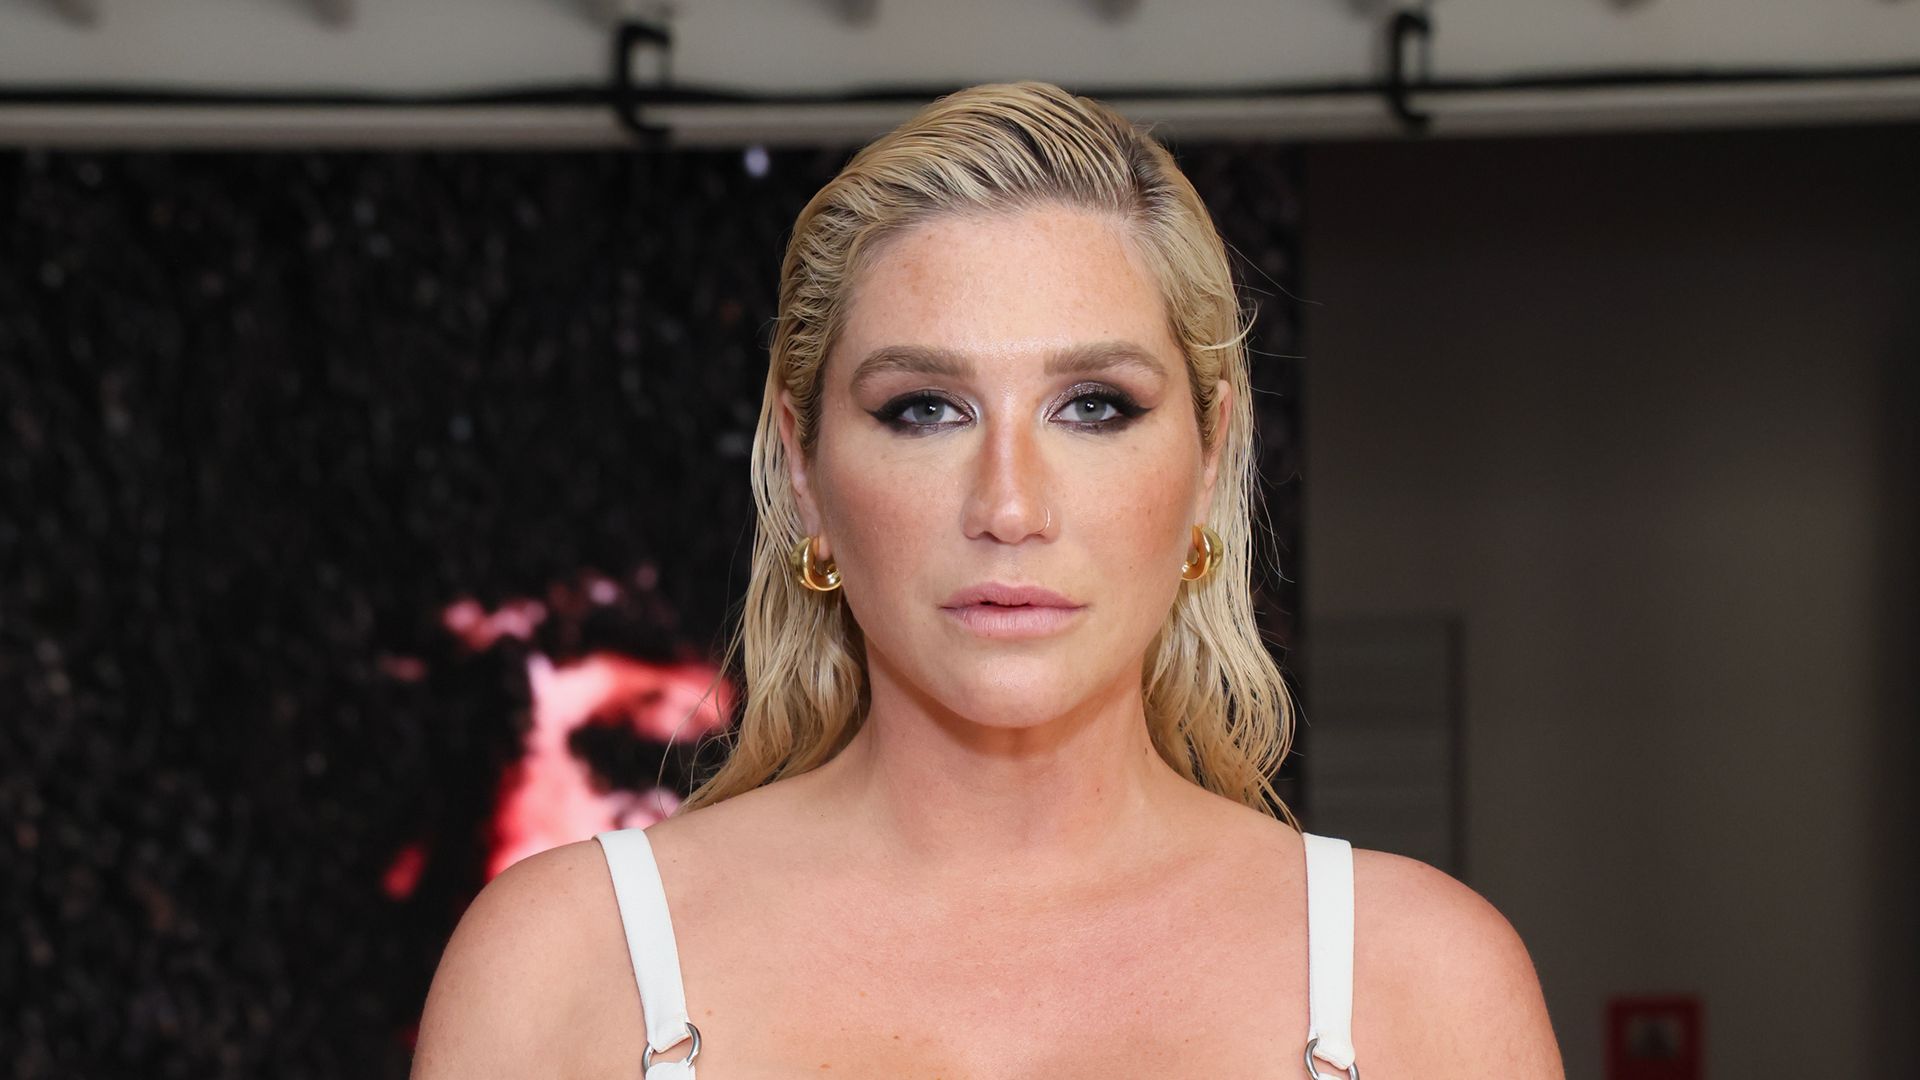 Kesha attends art exhibition curated by Kesha and Brian Roettinger to celebrate the release of Kesha's new album "Gag Order" at Sized Studio on May 18, 2023 in Los Angeles, California